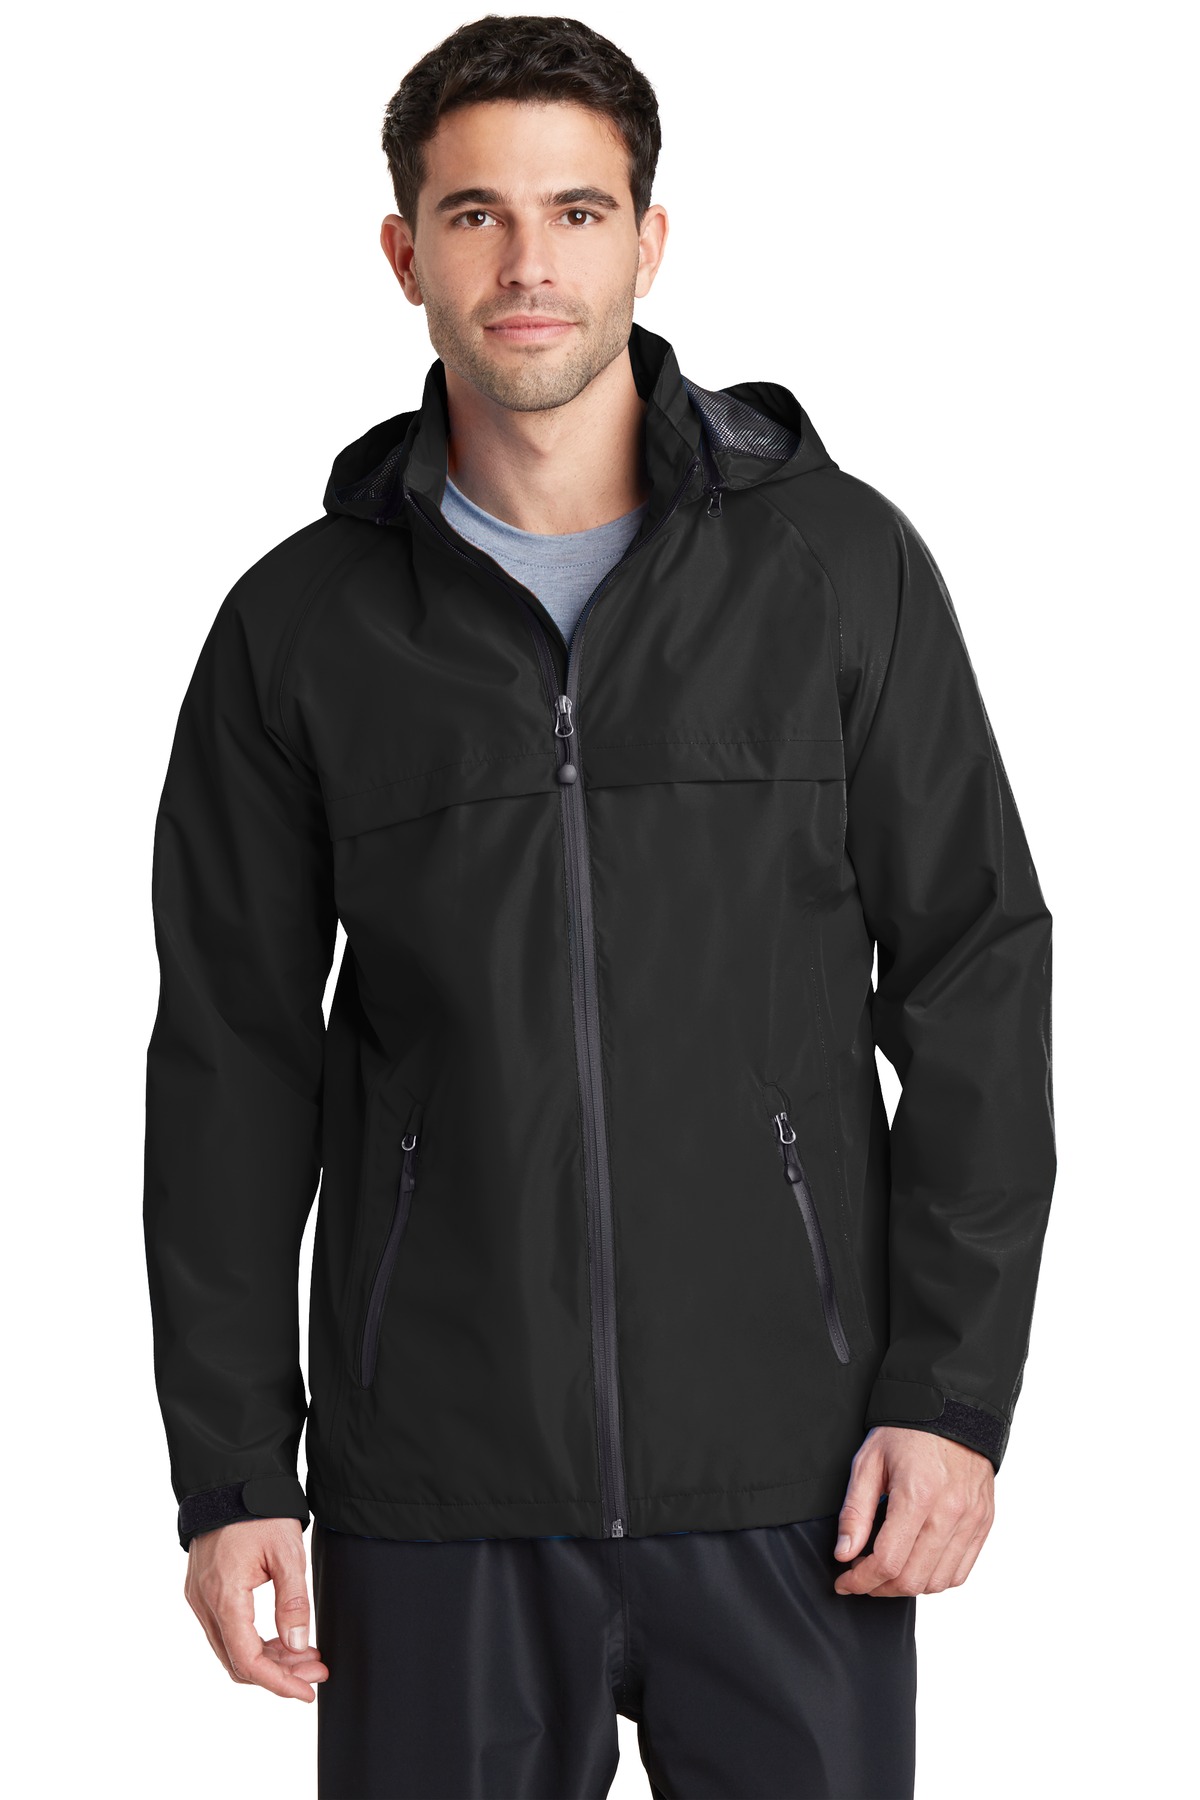 Port Authority Hospitality Outerwear ® Torrent Waterproof Jacket.-Port Authority